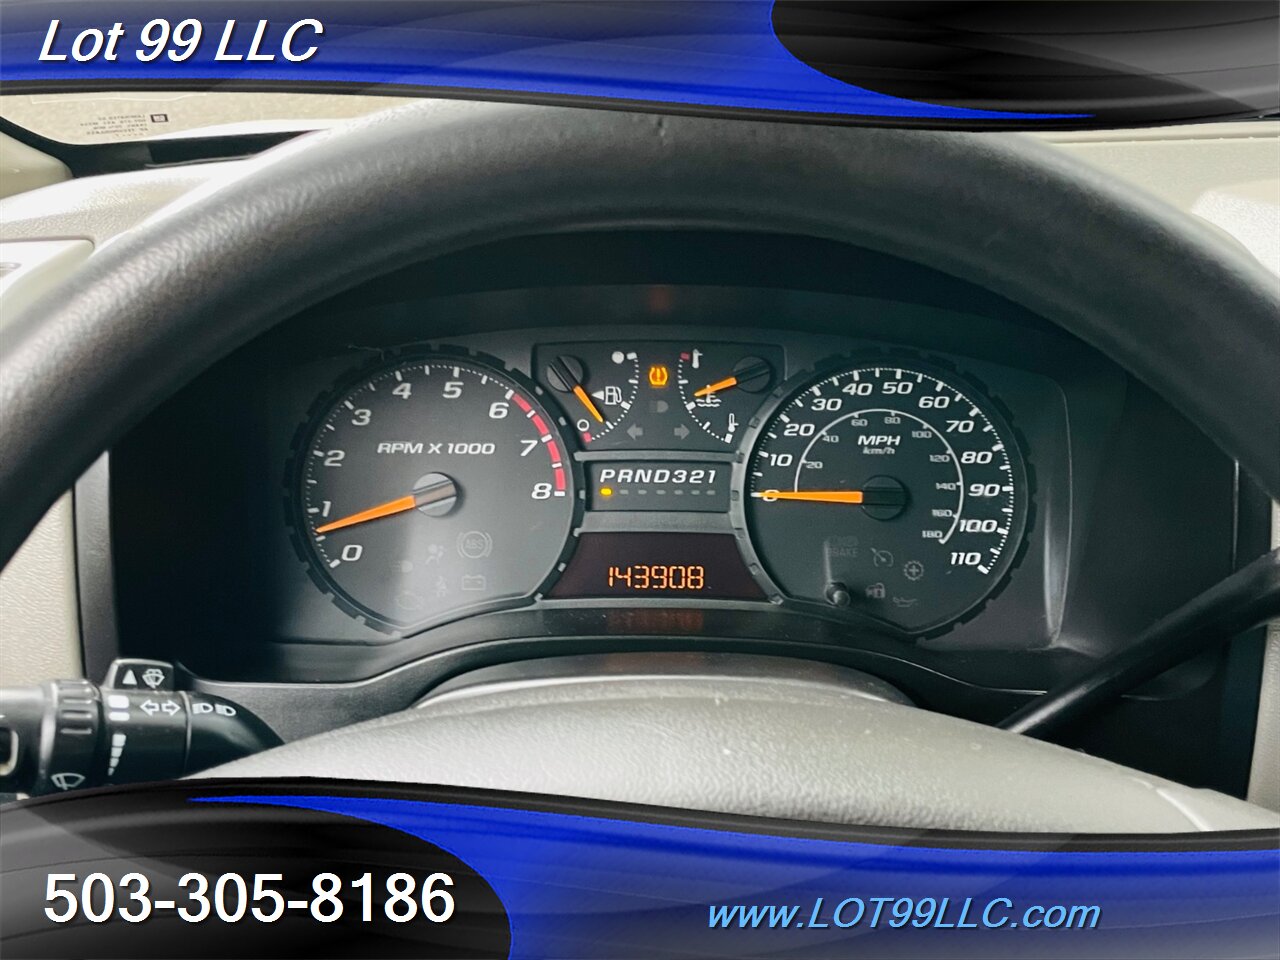 2007 Chevrolet Colorado Extended Cab LT 4x4 6' Bed Vortec 3.7L I5 242hp   - Photo 9 - Milwaukie, OR 97267